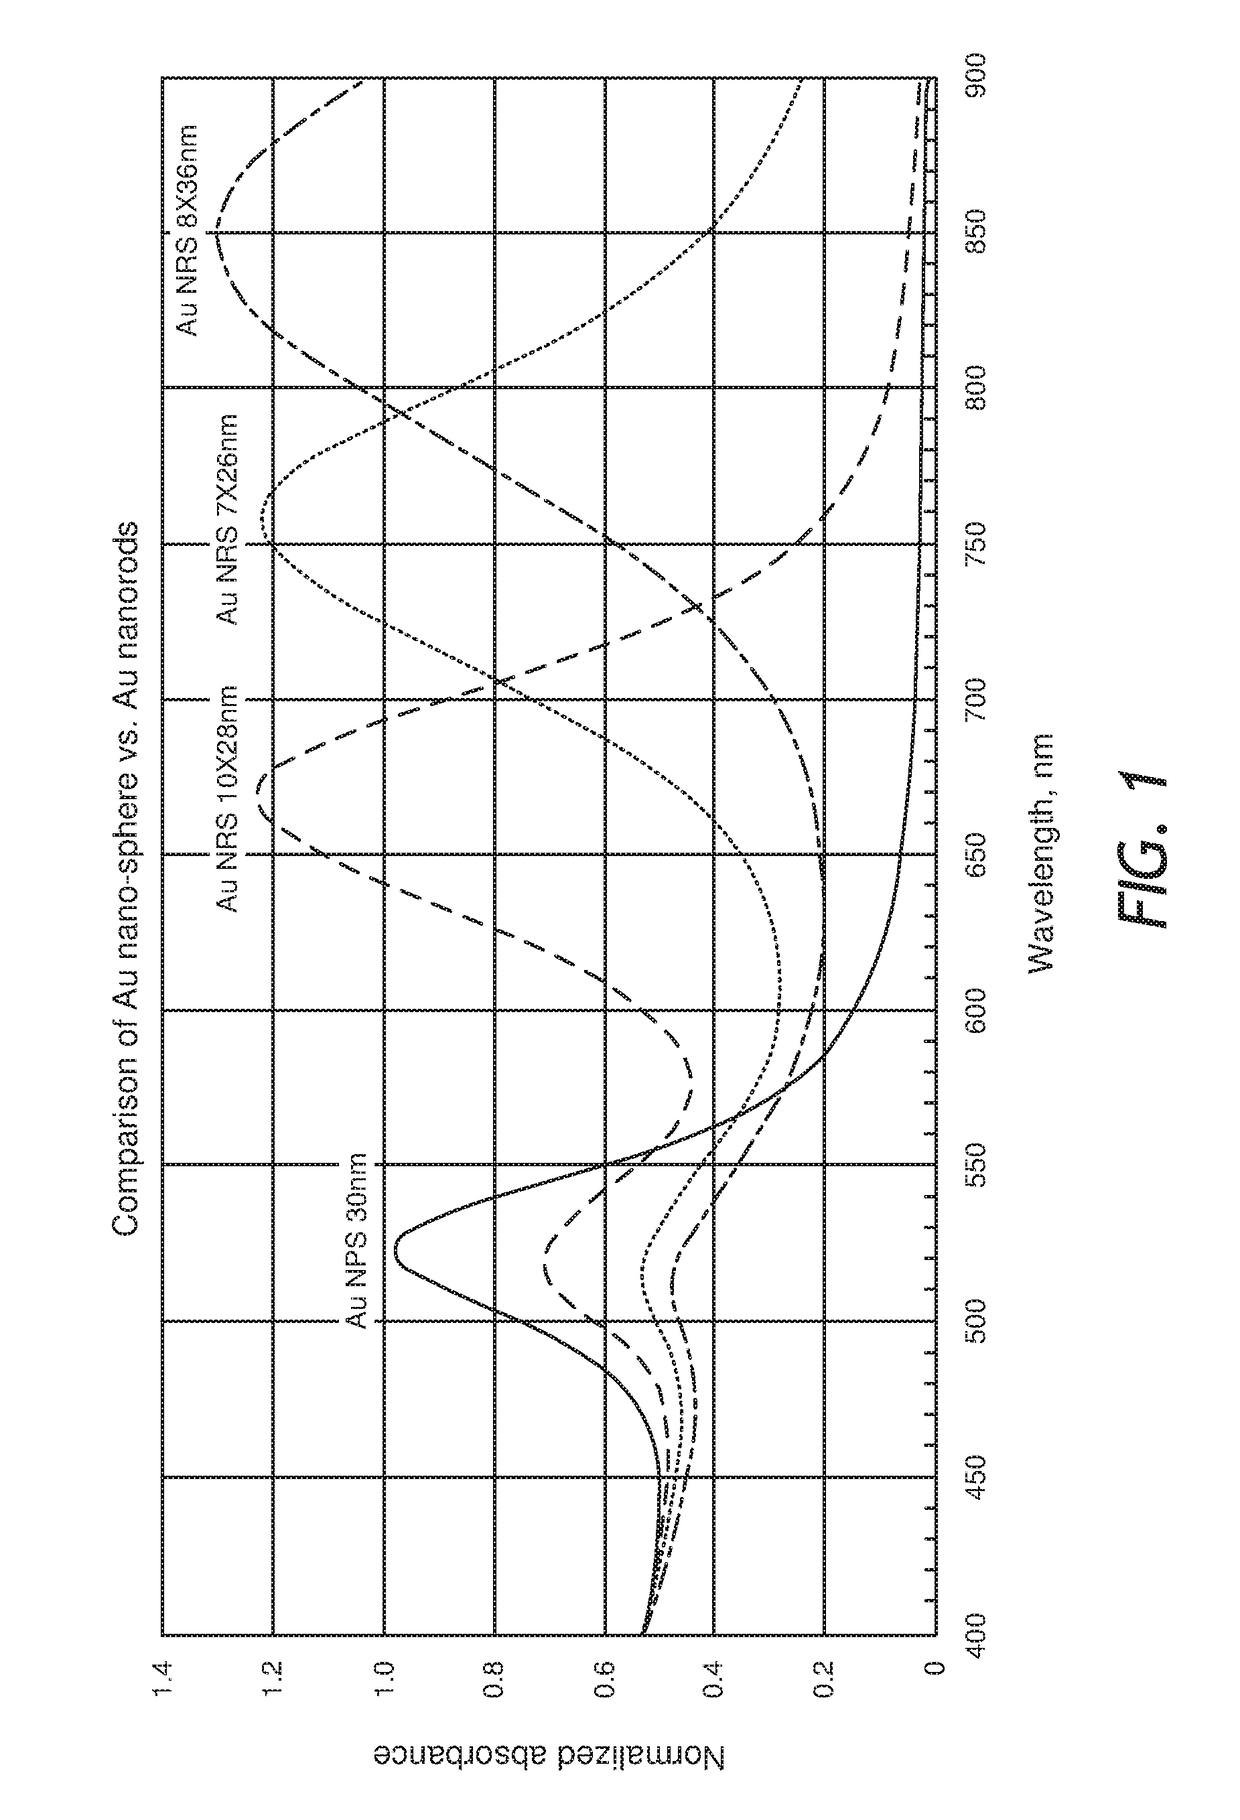 Cosmetic compositions capable of producing localized surface plasmonic resonance in response to indoor and/or outdoor lighting sources